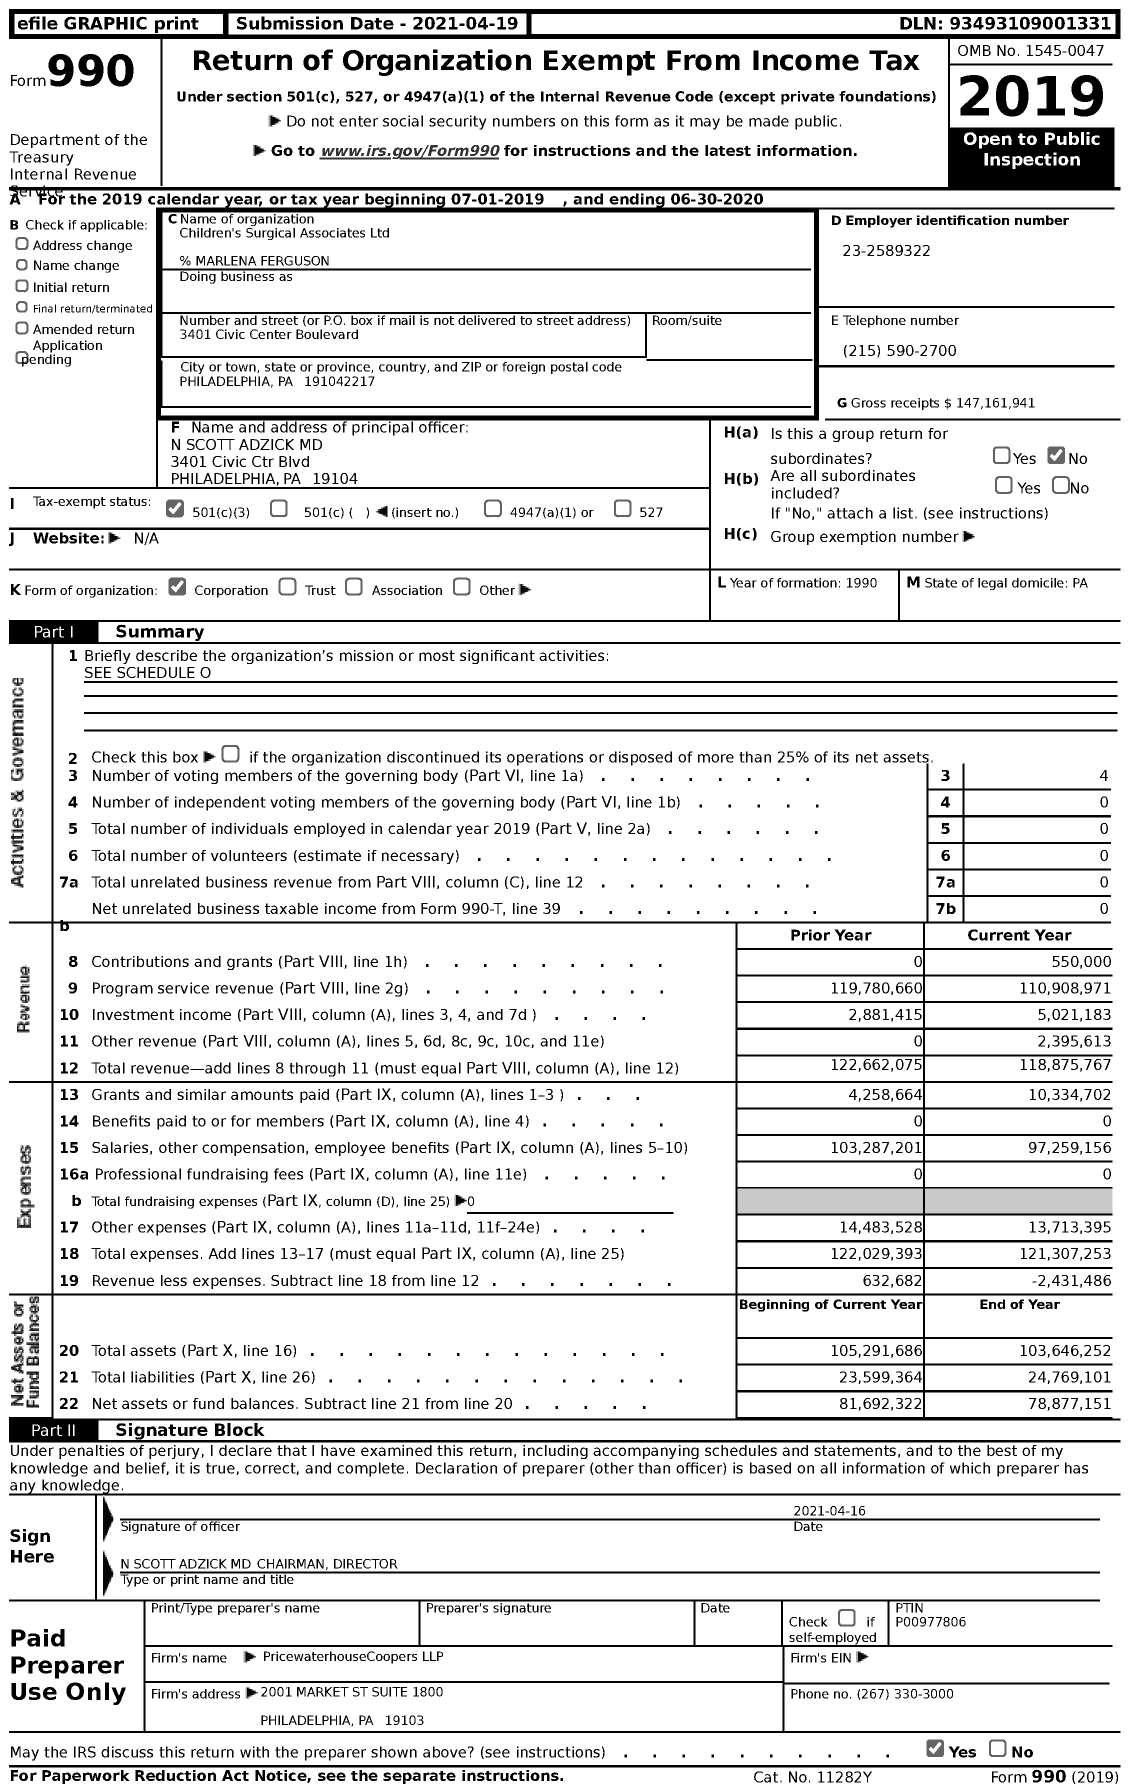 Image of first page of 2019 Form 990 for Children's Surgical Associates (CSA)